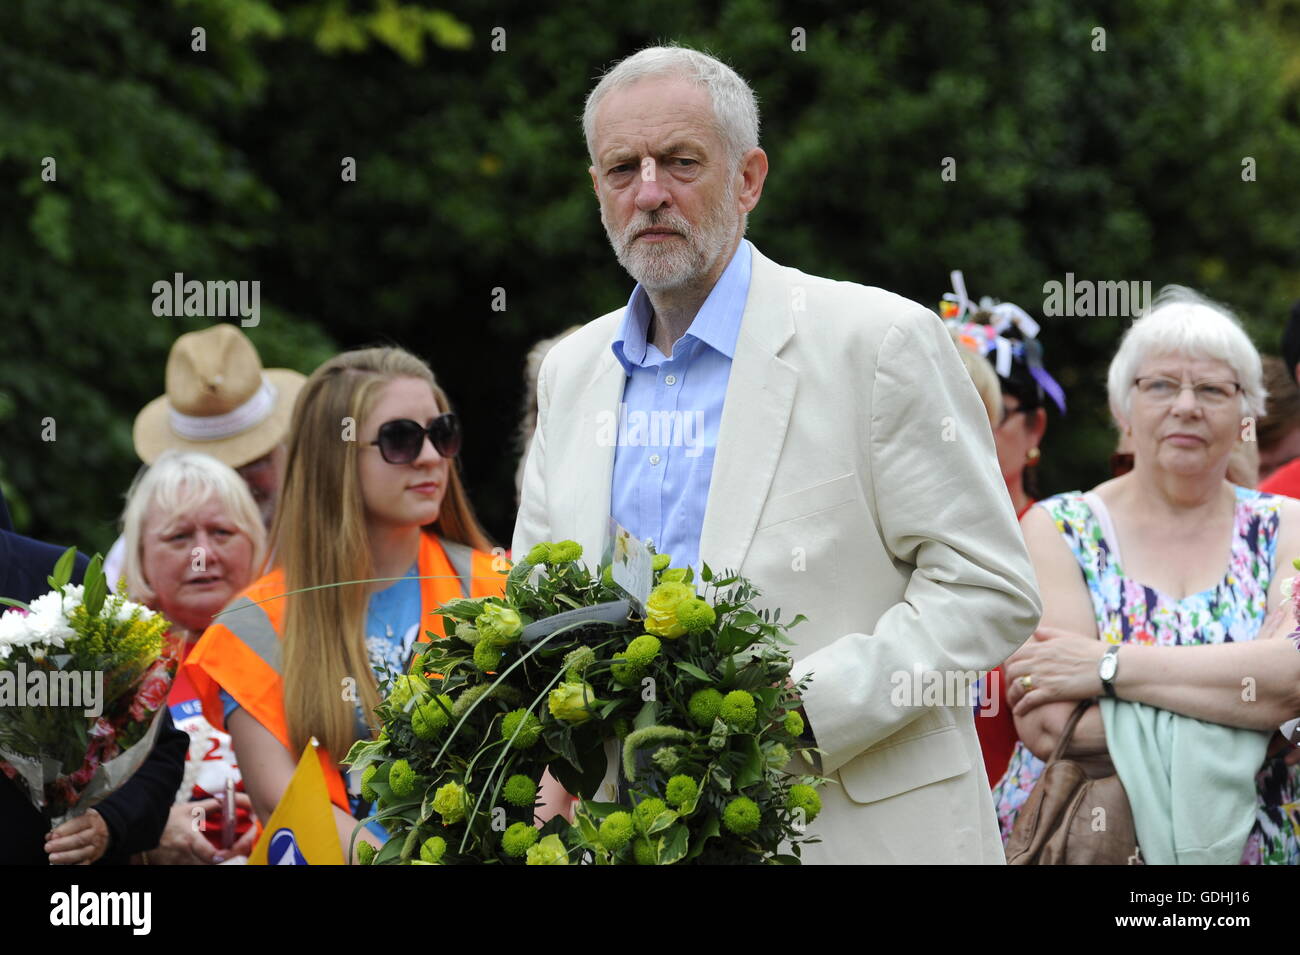 Tolpuddle Martyrs Rally, Dorset, UK. 17th July 2016. Labour leader Jeremy Corbyn at the wreath laying ceremony at the grave of James Hammett.  Photo by Graham Hunt/Alamy Live News. Stock Photo